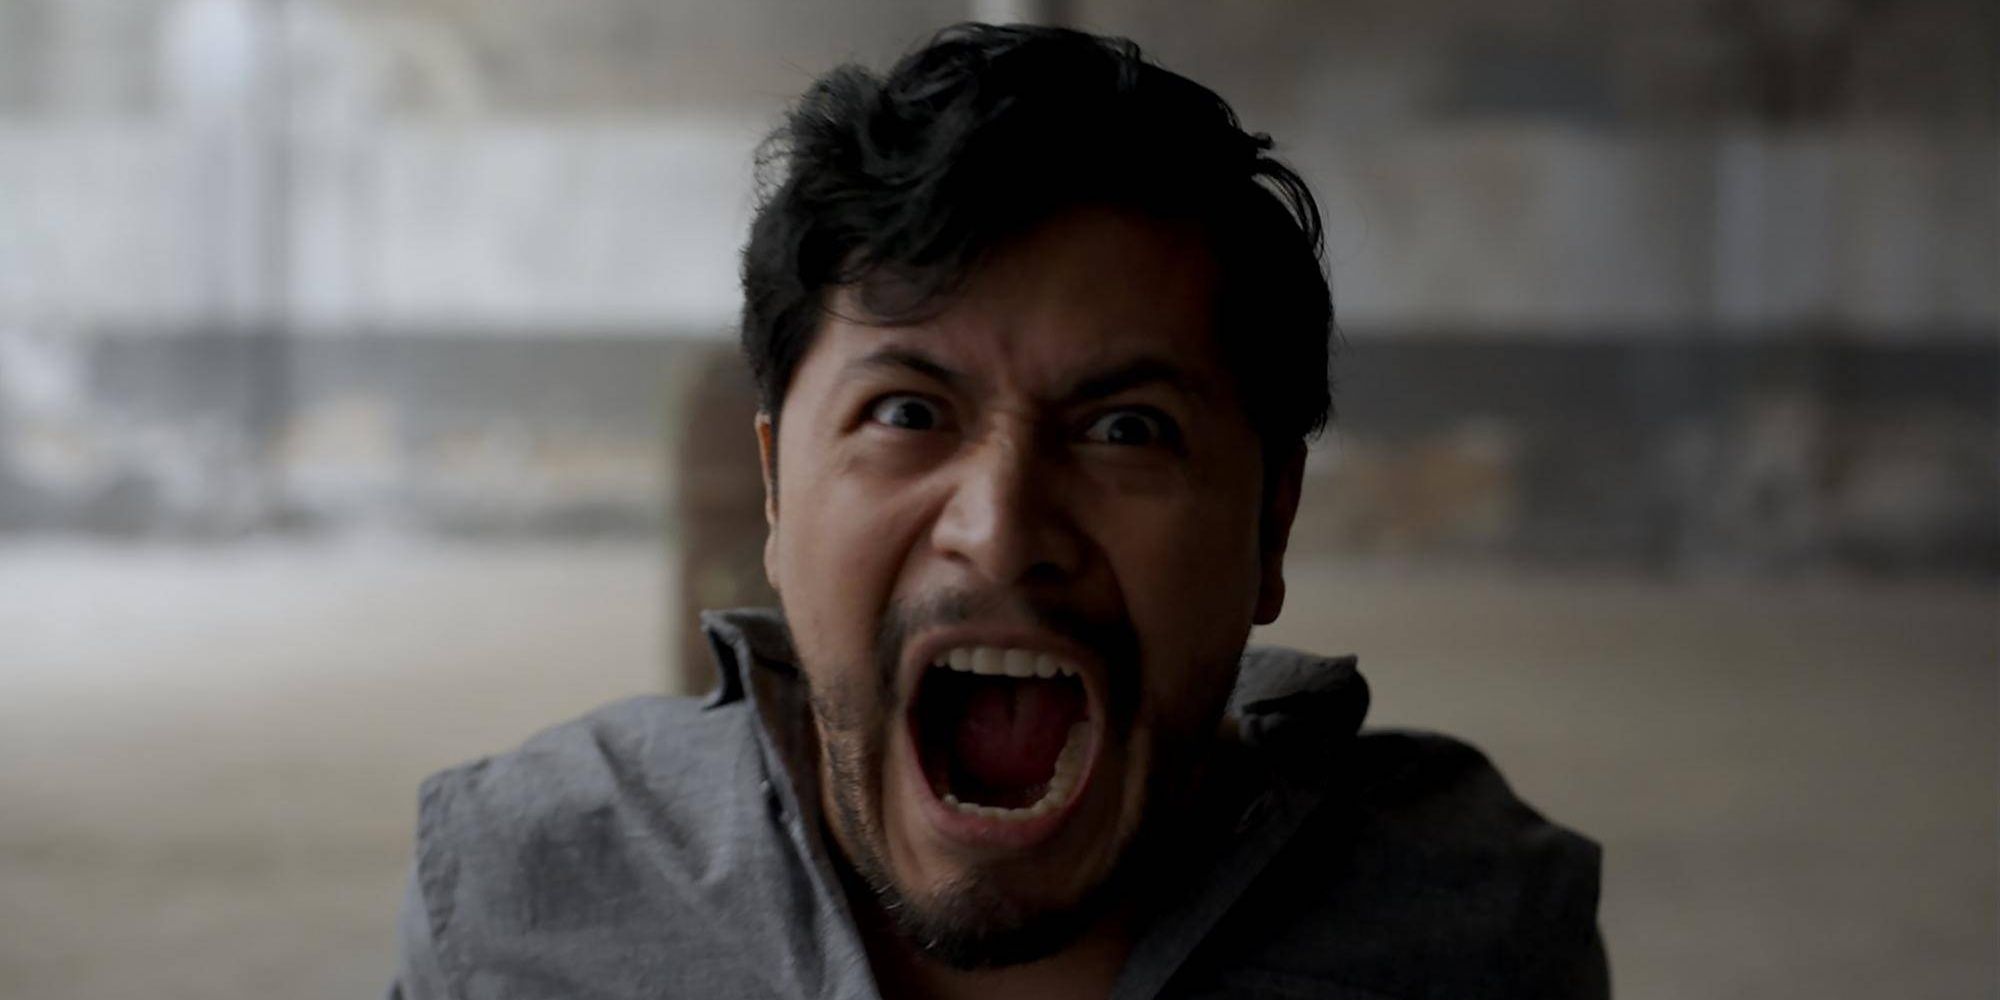 Harold Torres as Santiago screaming at the camera in Disappear Completely